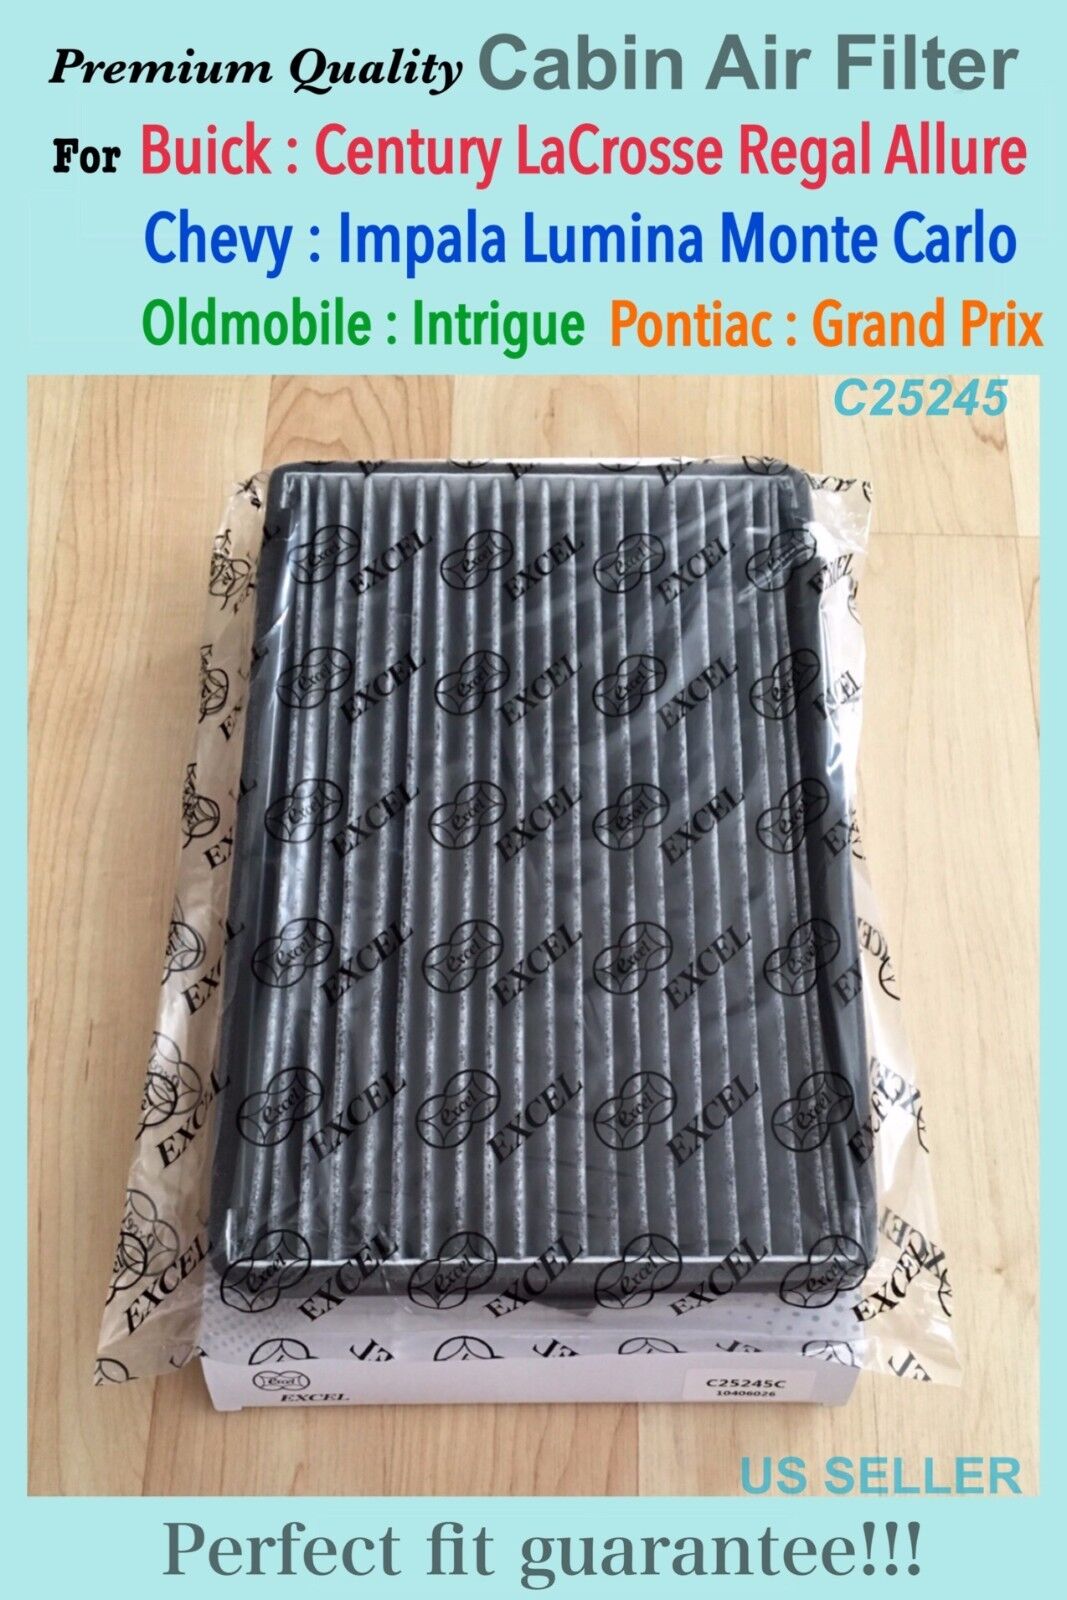 CARBONIZED CABIN AIR FILTER For Impala Impala Limited Monte Carlo Lumina Parts for Sale 1998 Chevy Lumina Cabin Air Filter Location